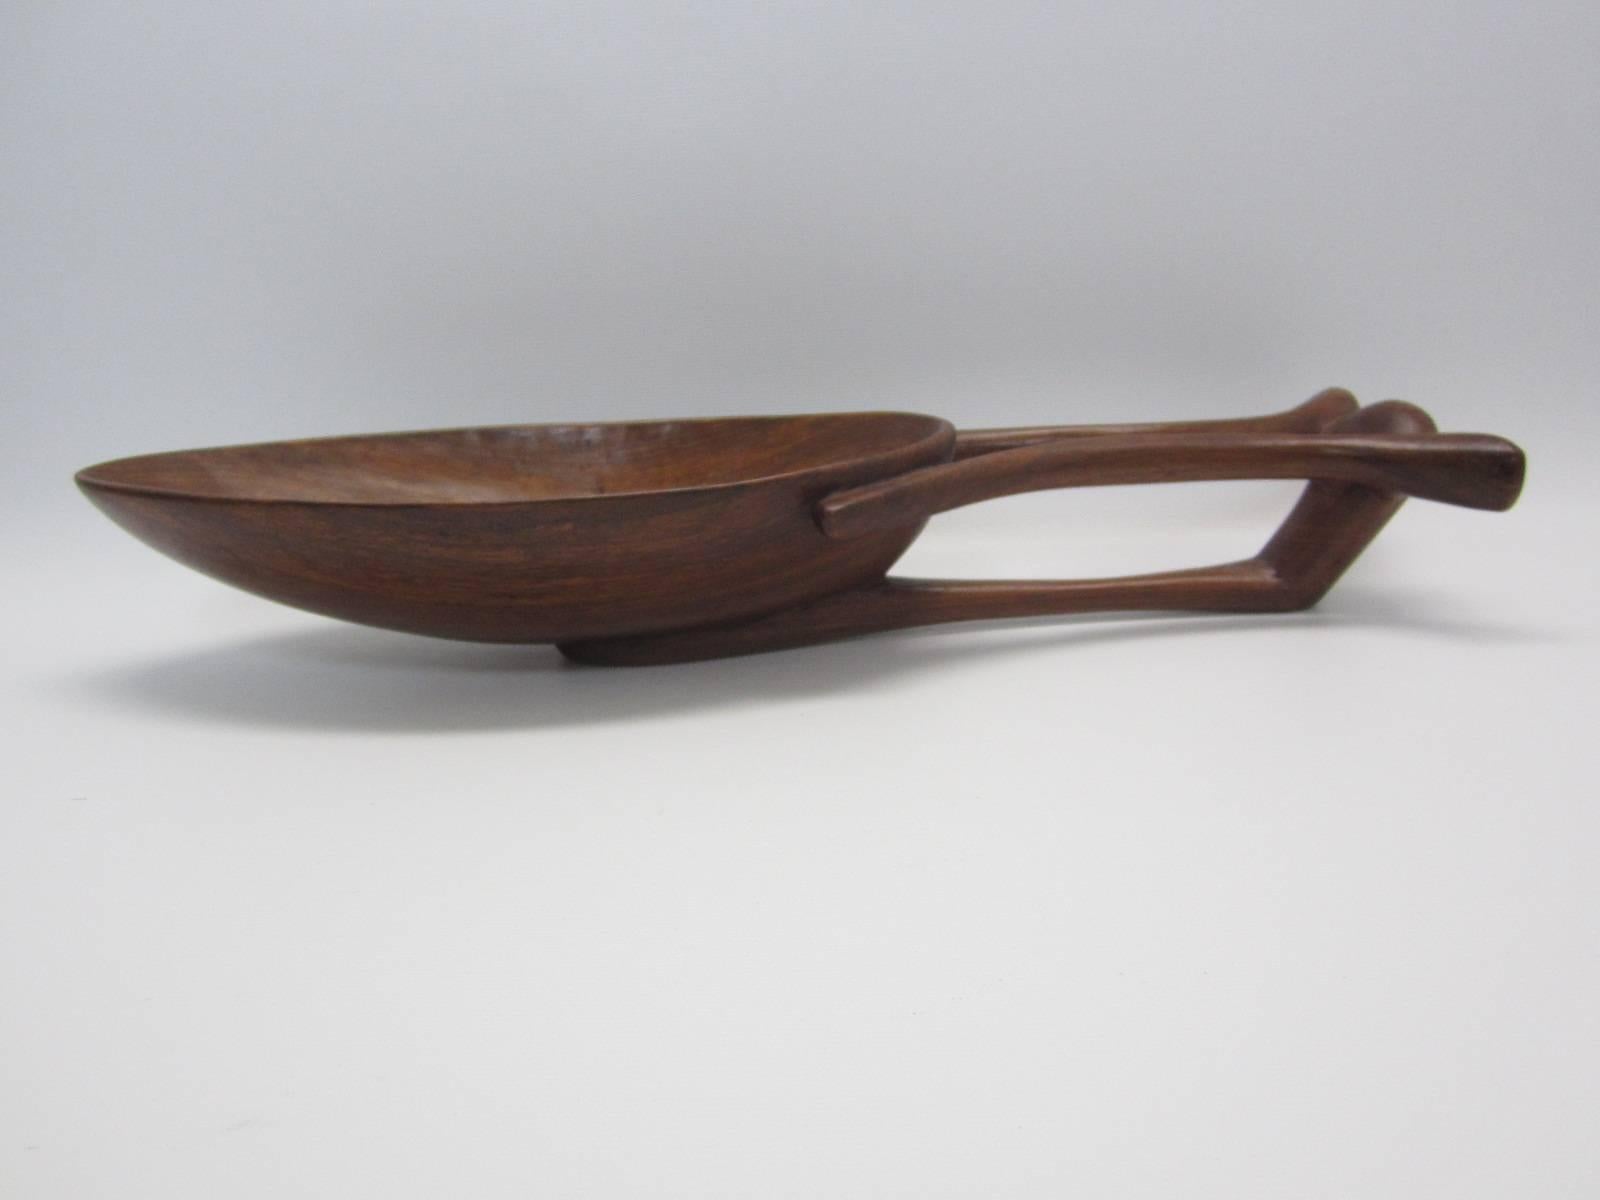 Beautifully carved wood bowl with carved three-part handle which extends underneath the bowl providing stability as a base. Lovely patina and proportion with almond-shaped bowl. Bowl is both decorative and utilitarian at once.